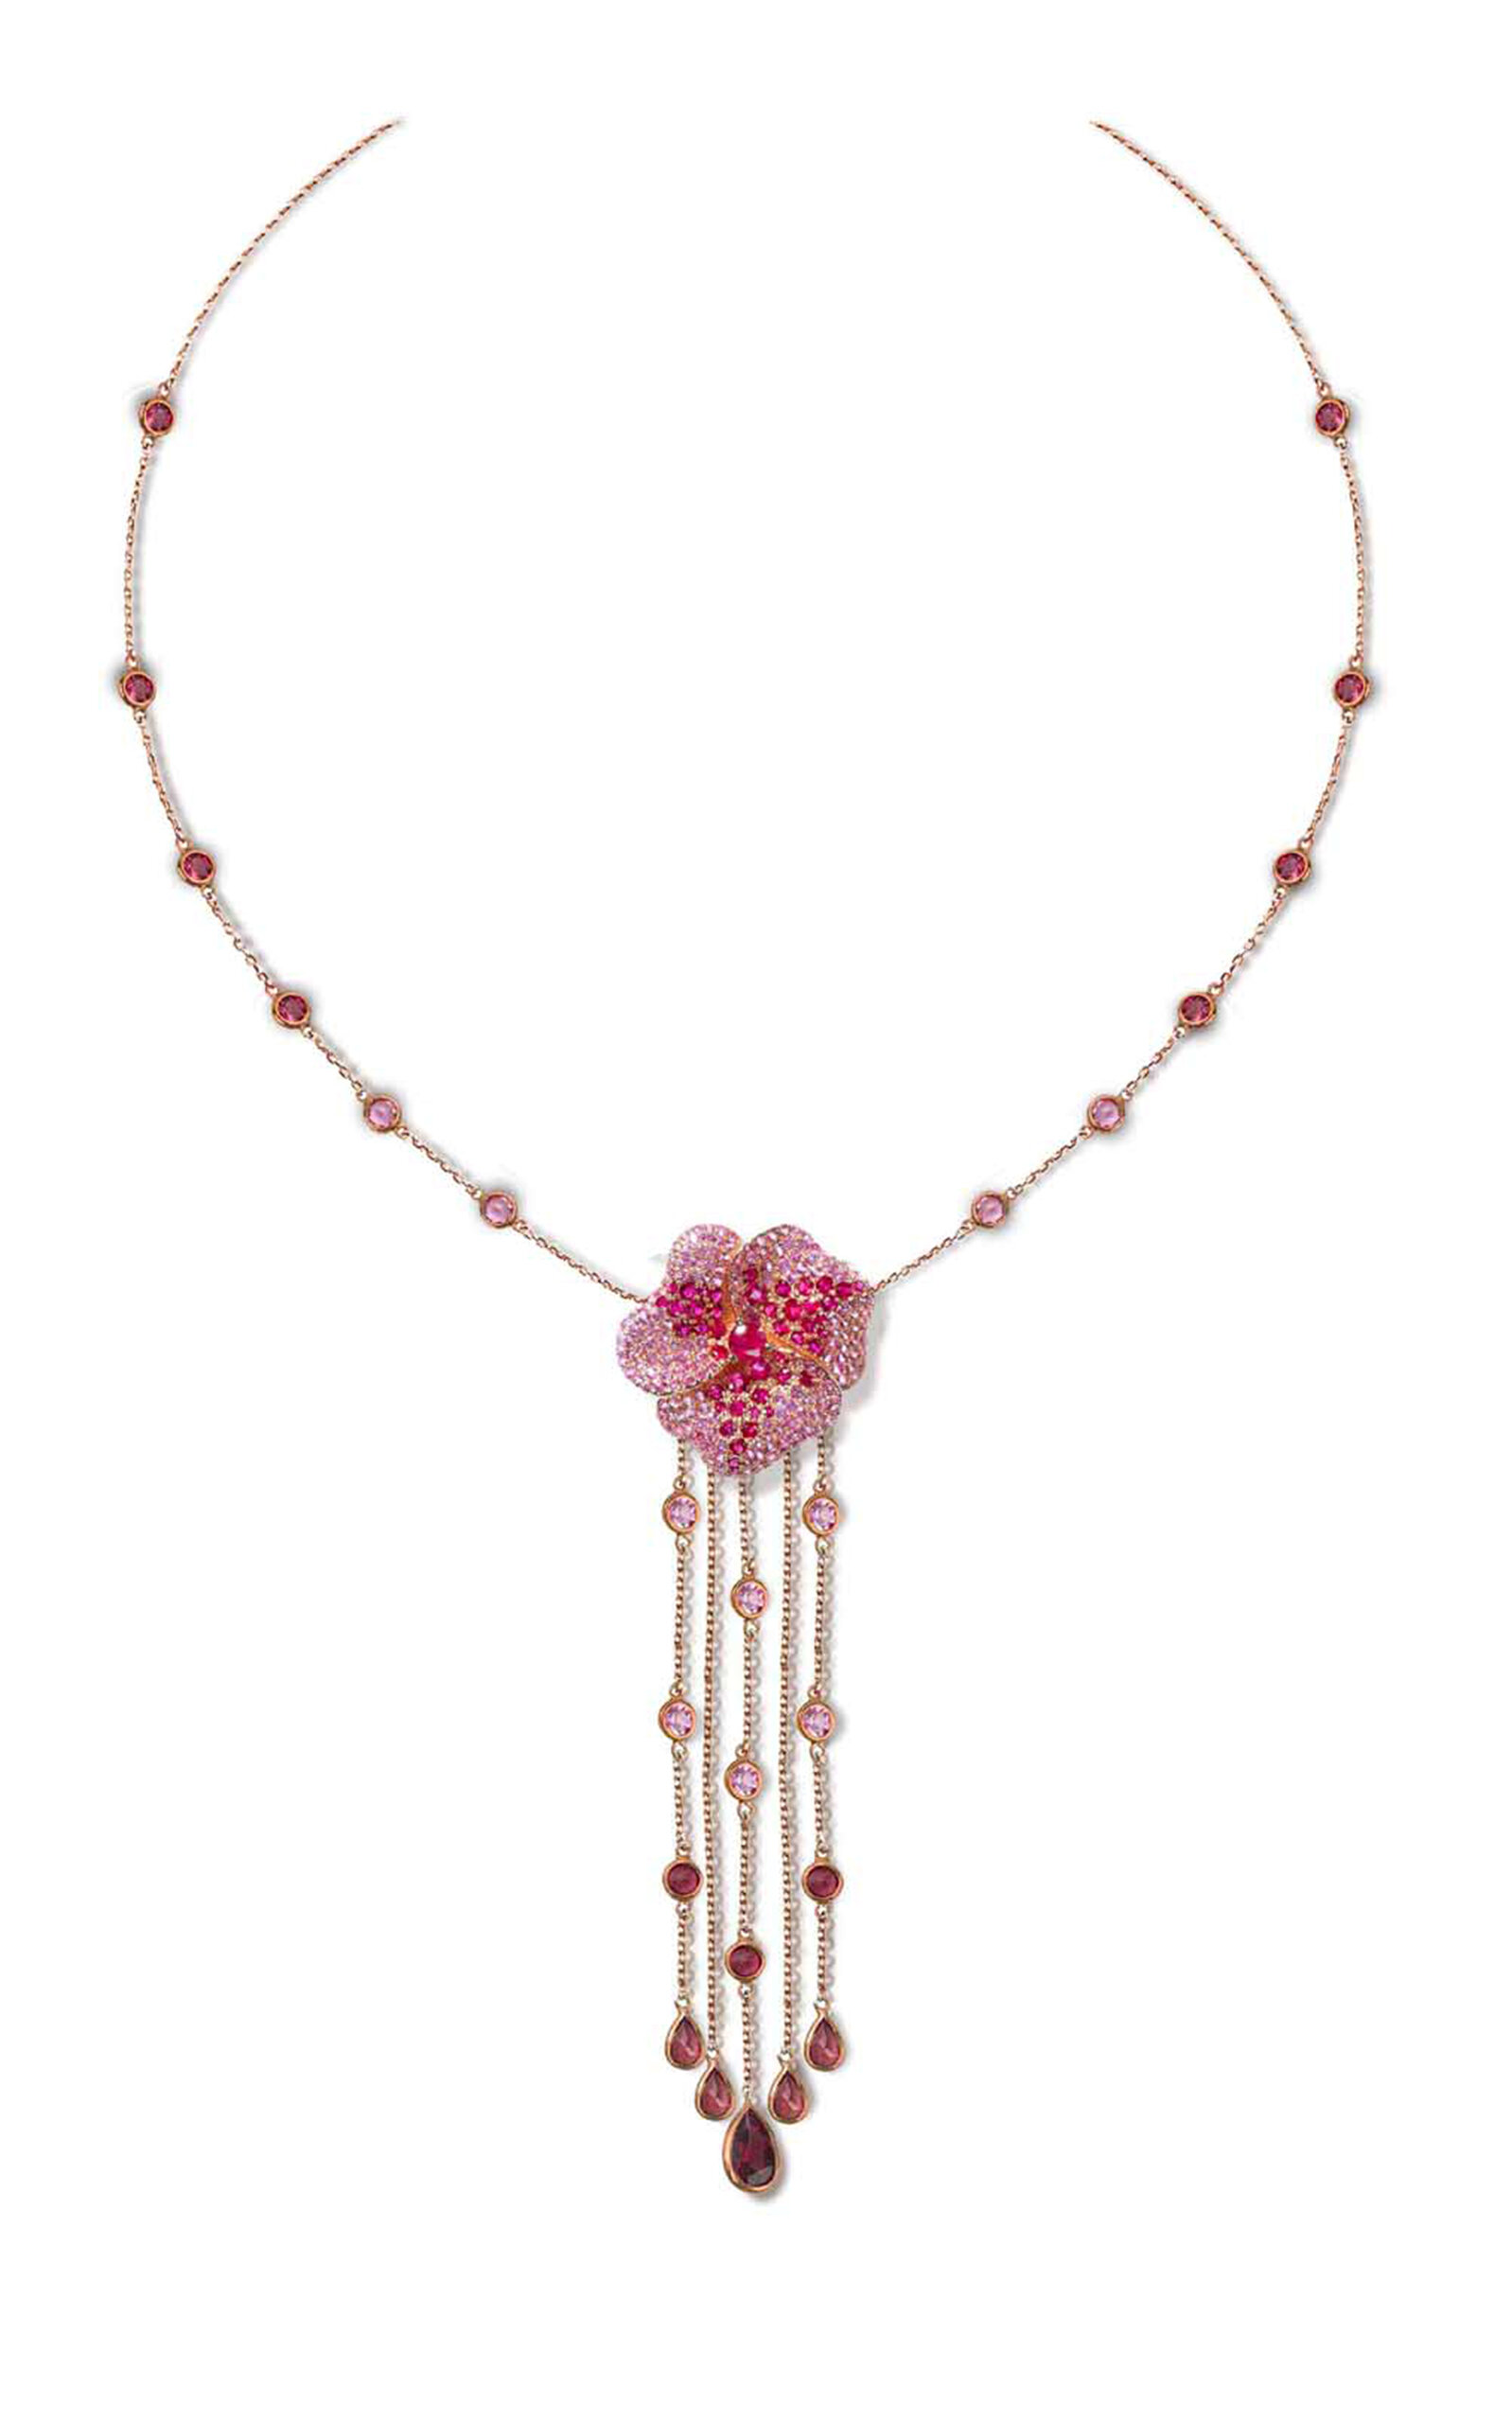 AS29 Women's One of a Kind Bloom 18K Rose Gold; Sapphire And Rhodorite Necklace